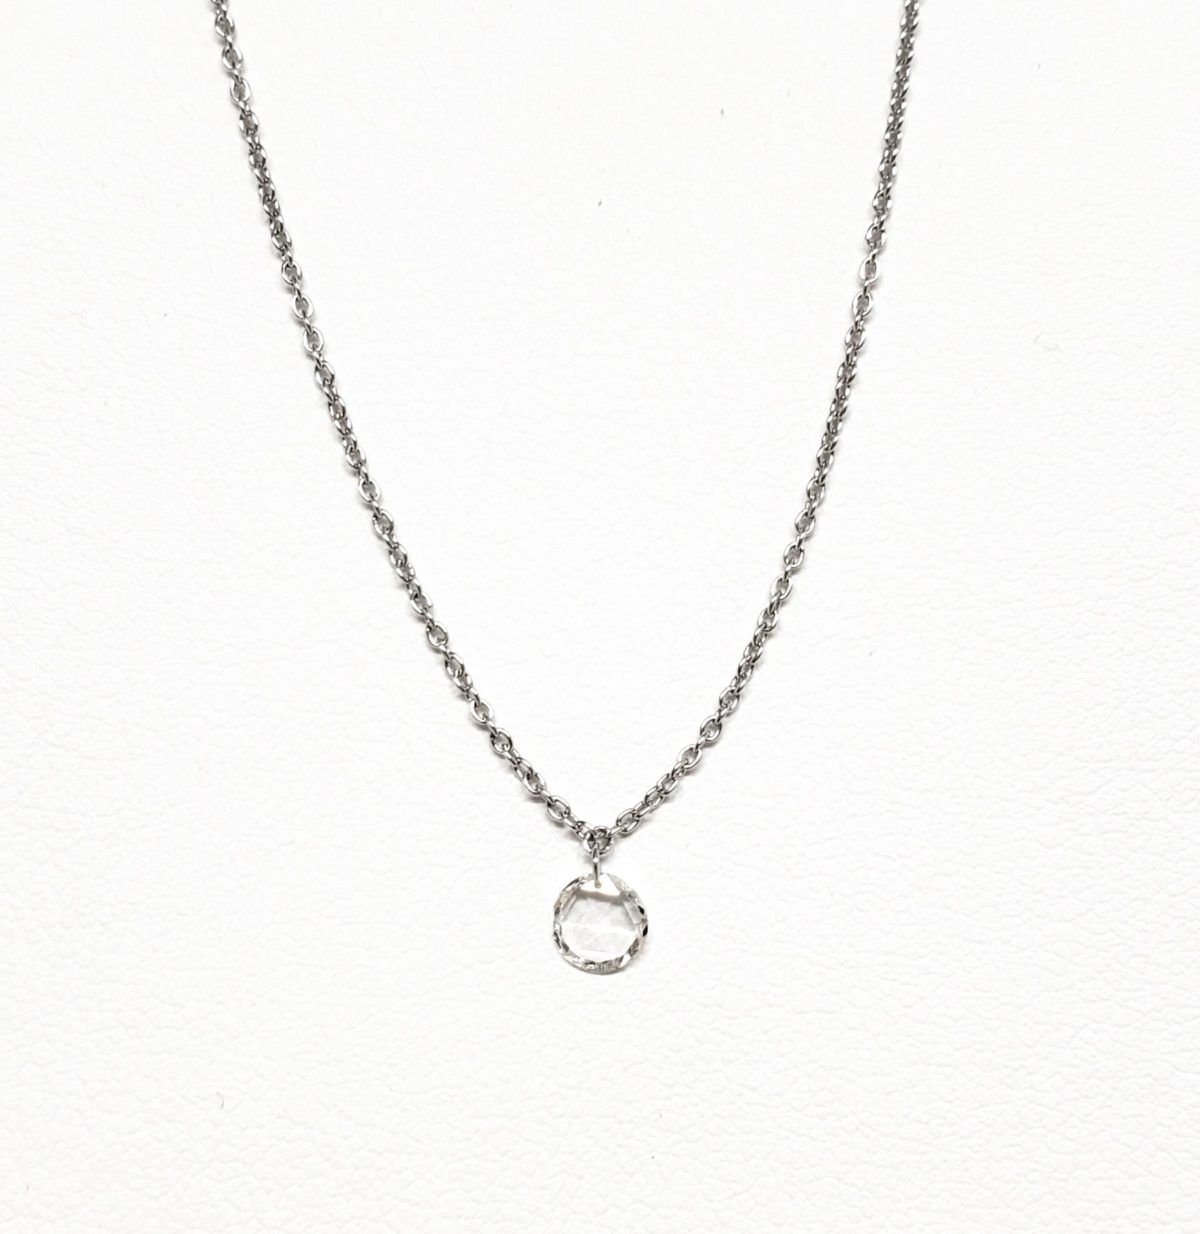 White Gold and Rose cut Diamond Necklace